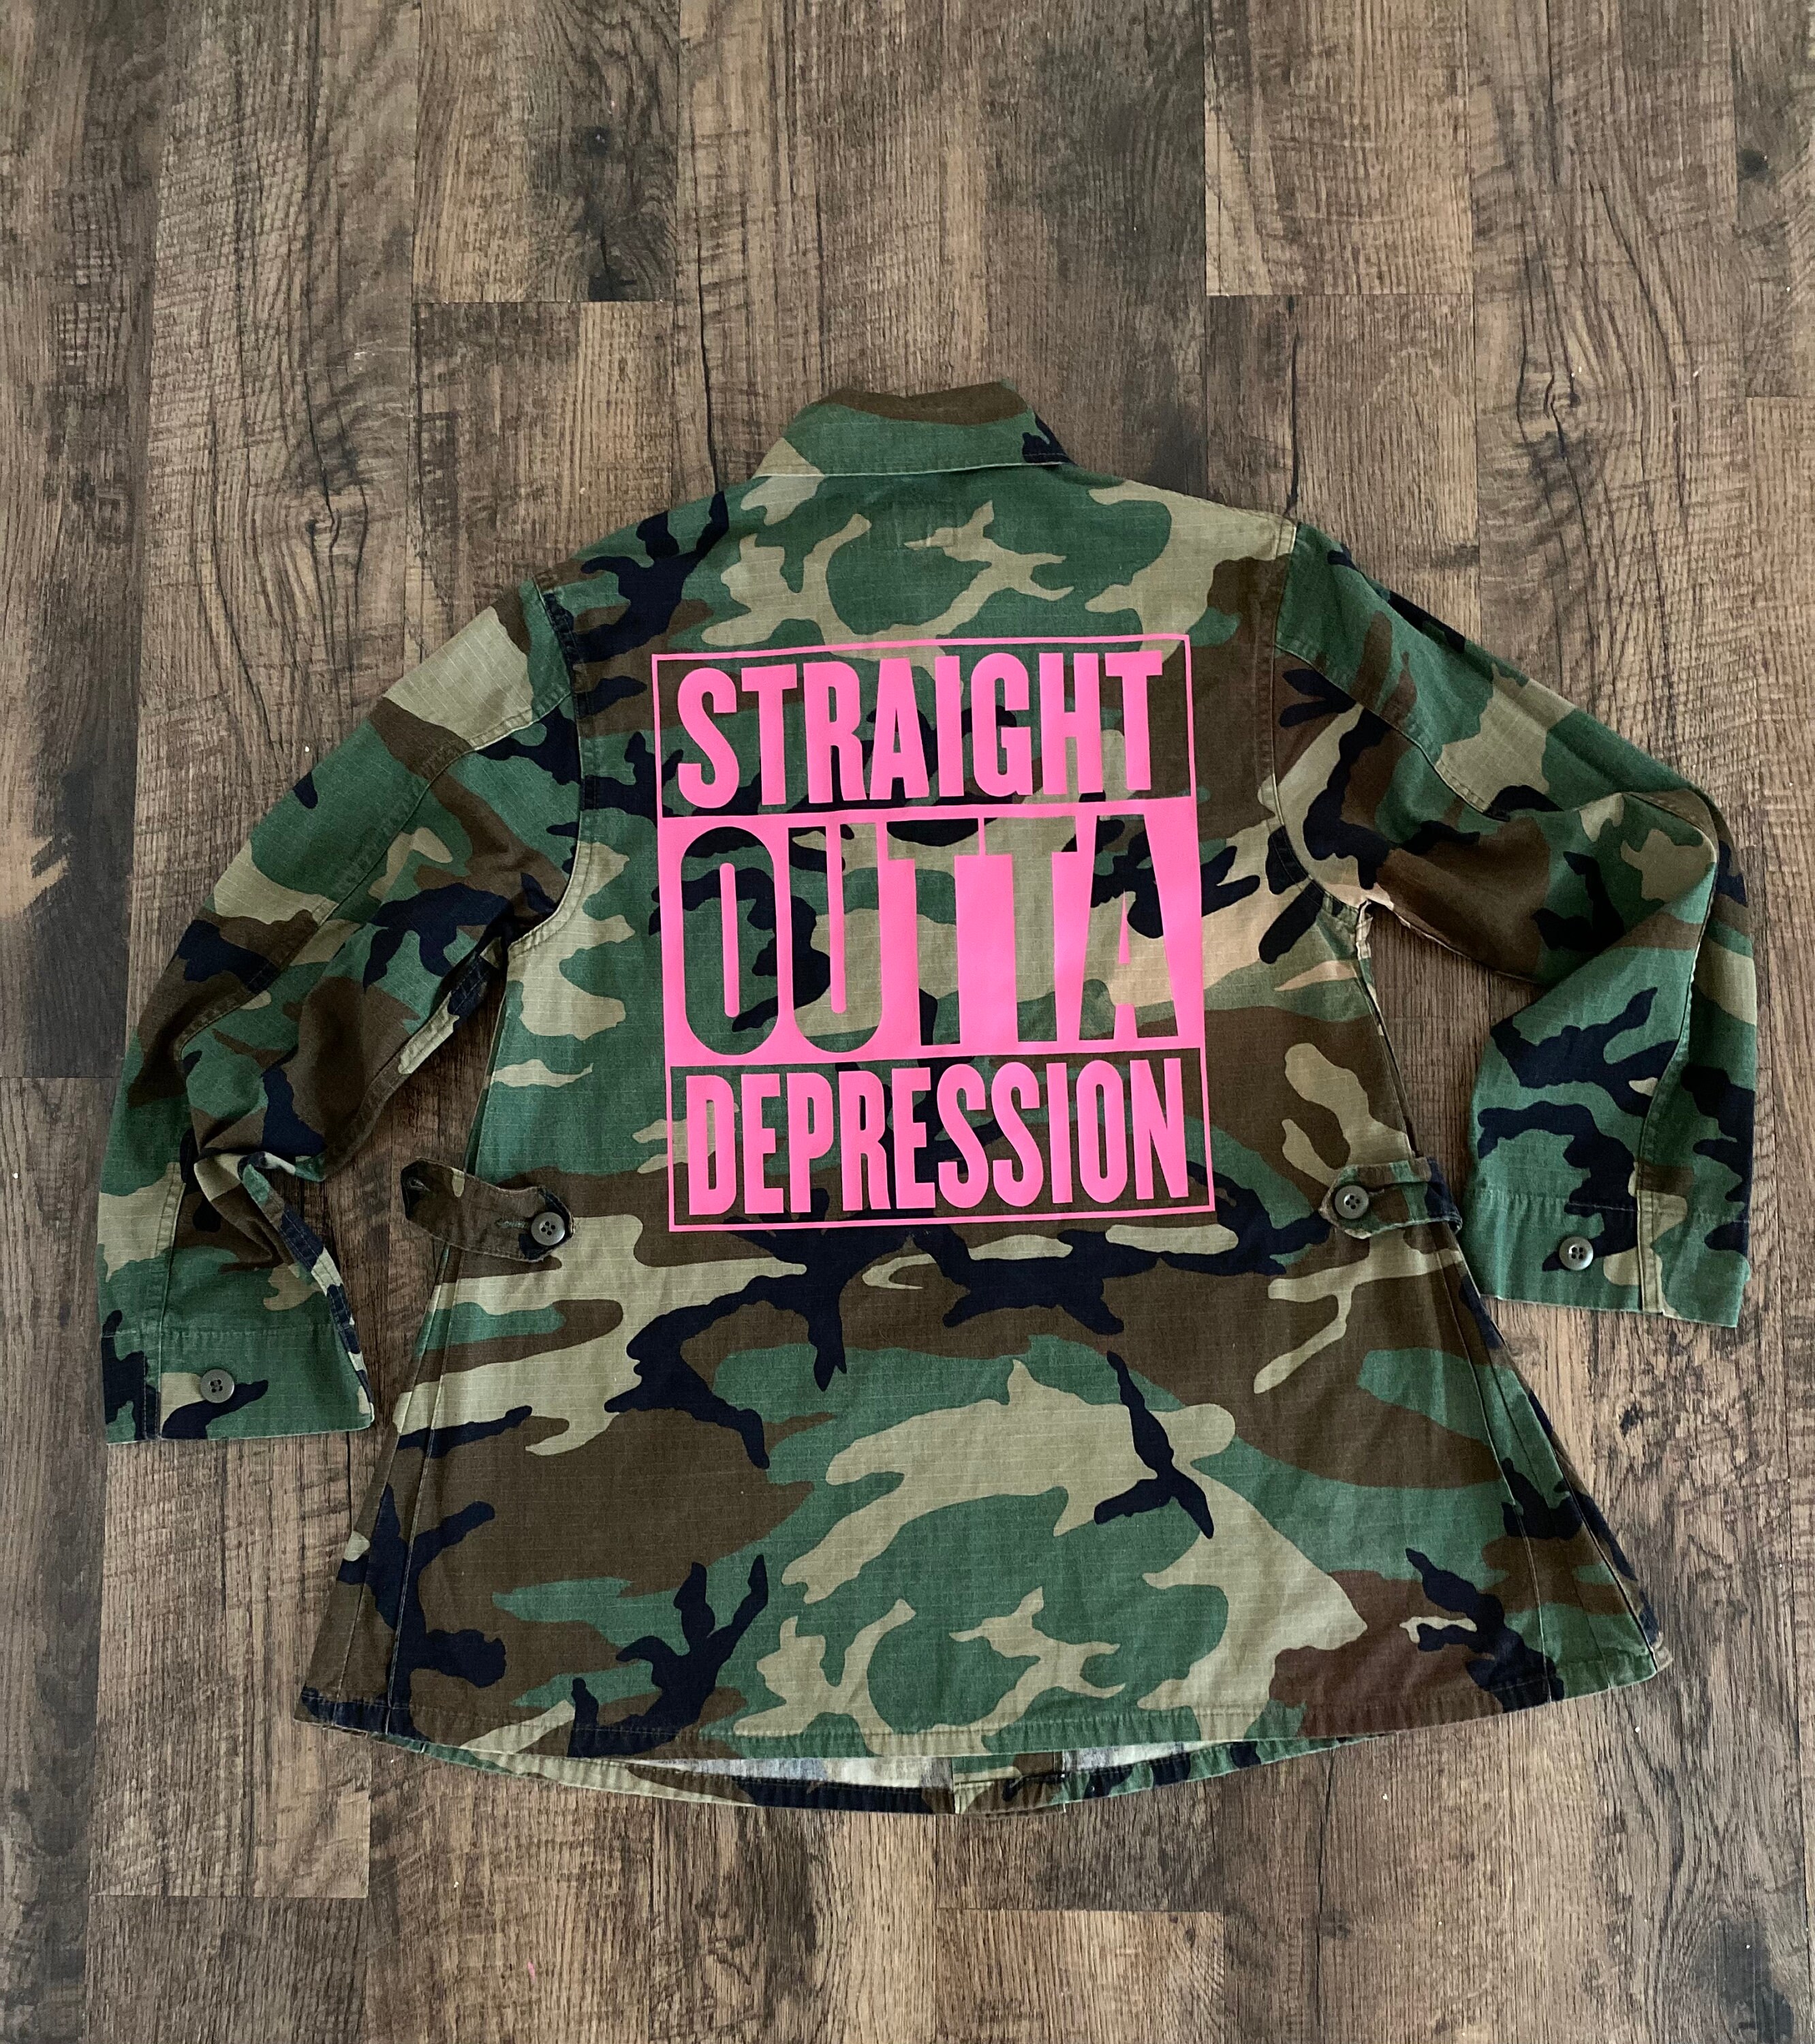 Customised Green Camo Jackets, Ex-Army